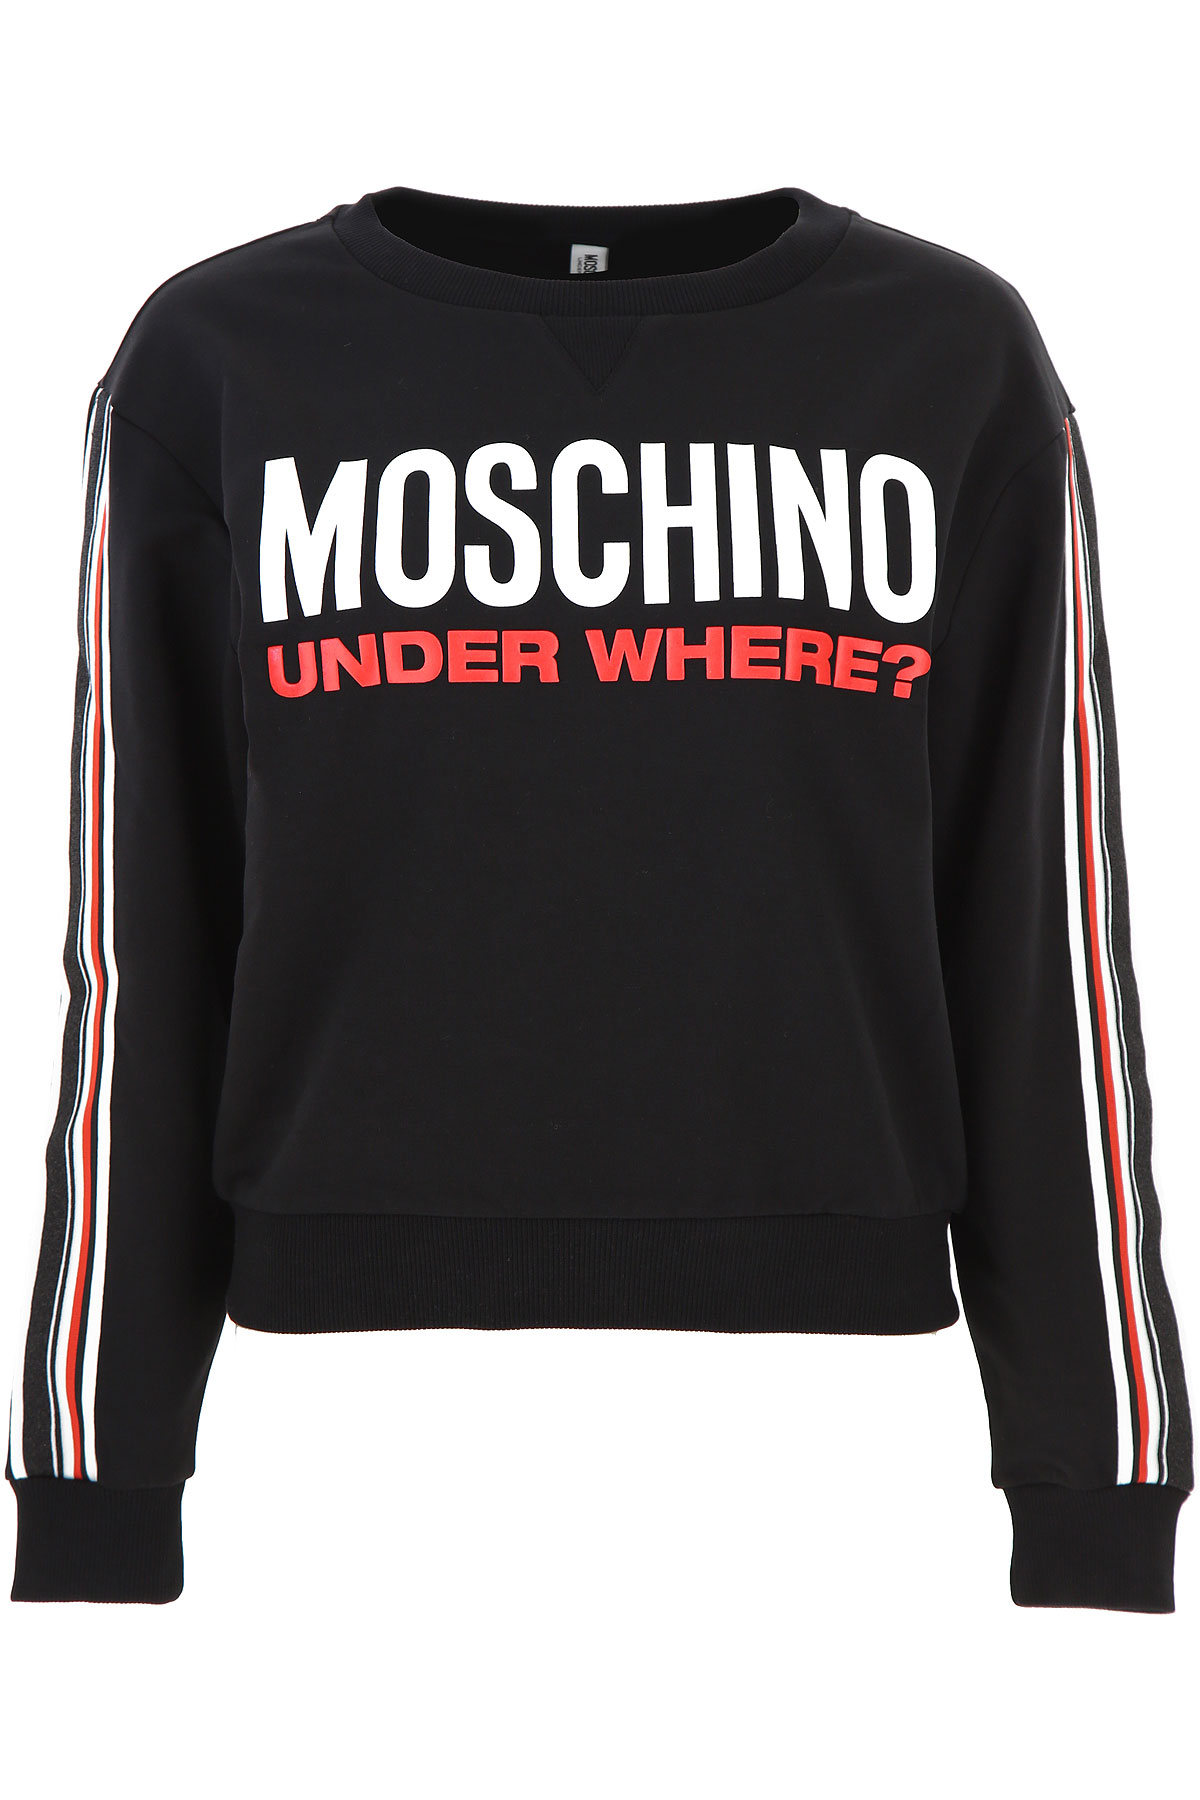 Womens Clothing Moschino, Style code: a1712-9001-0555